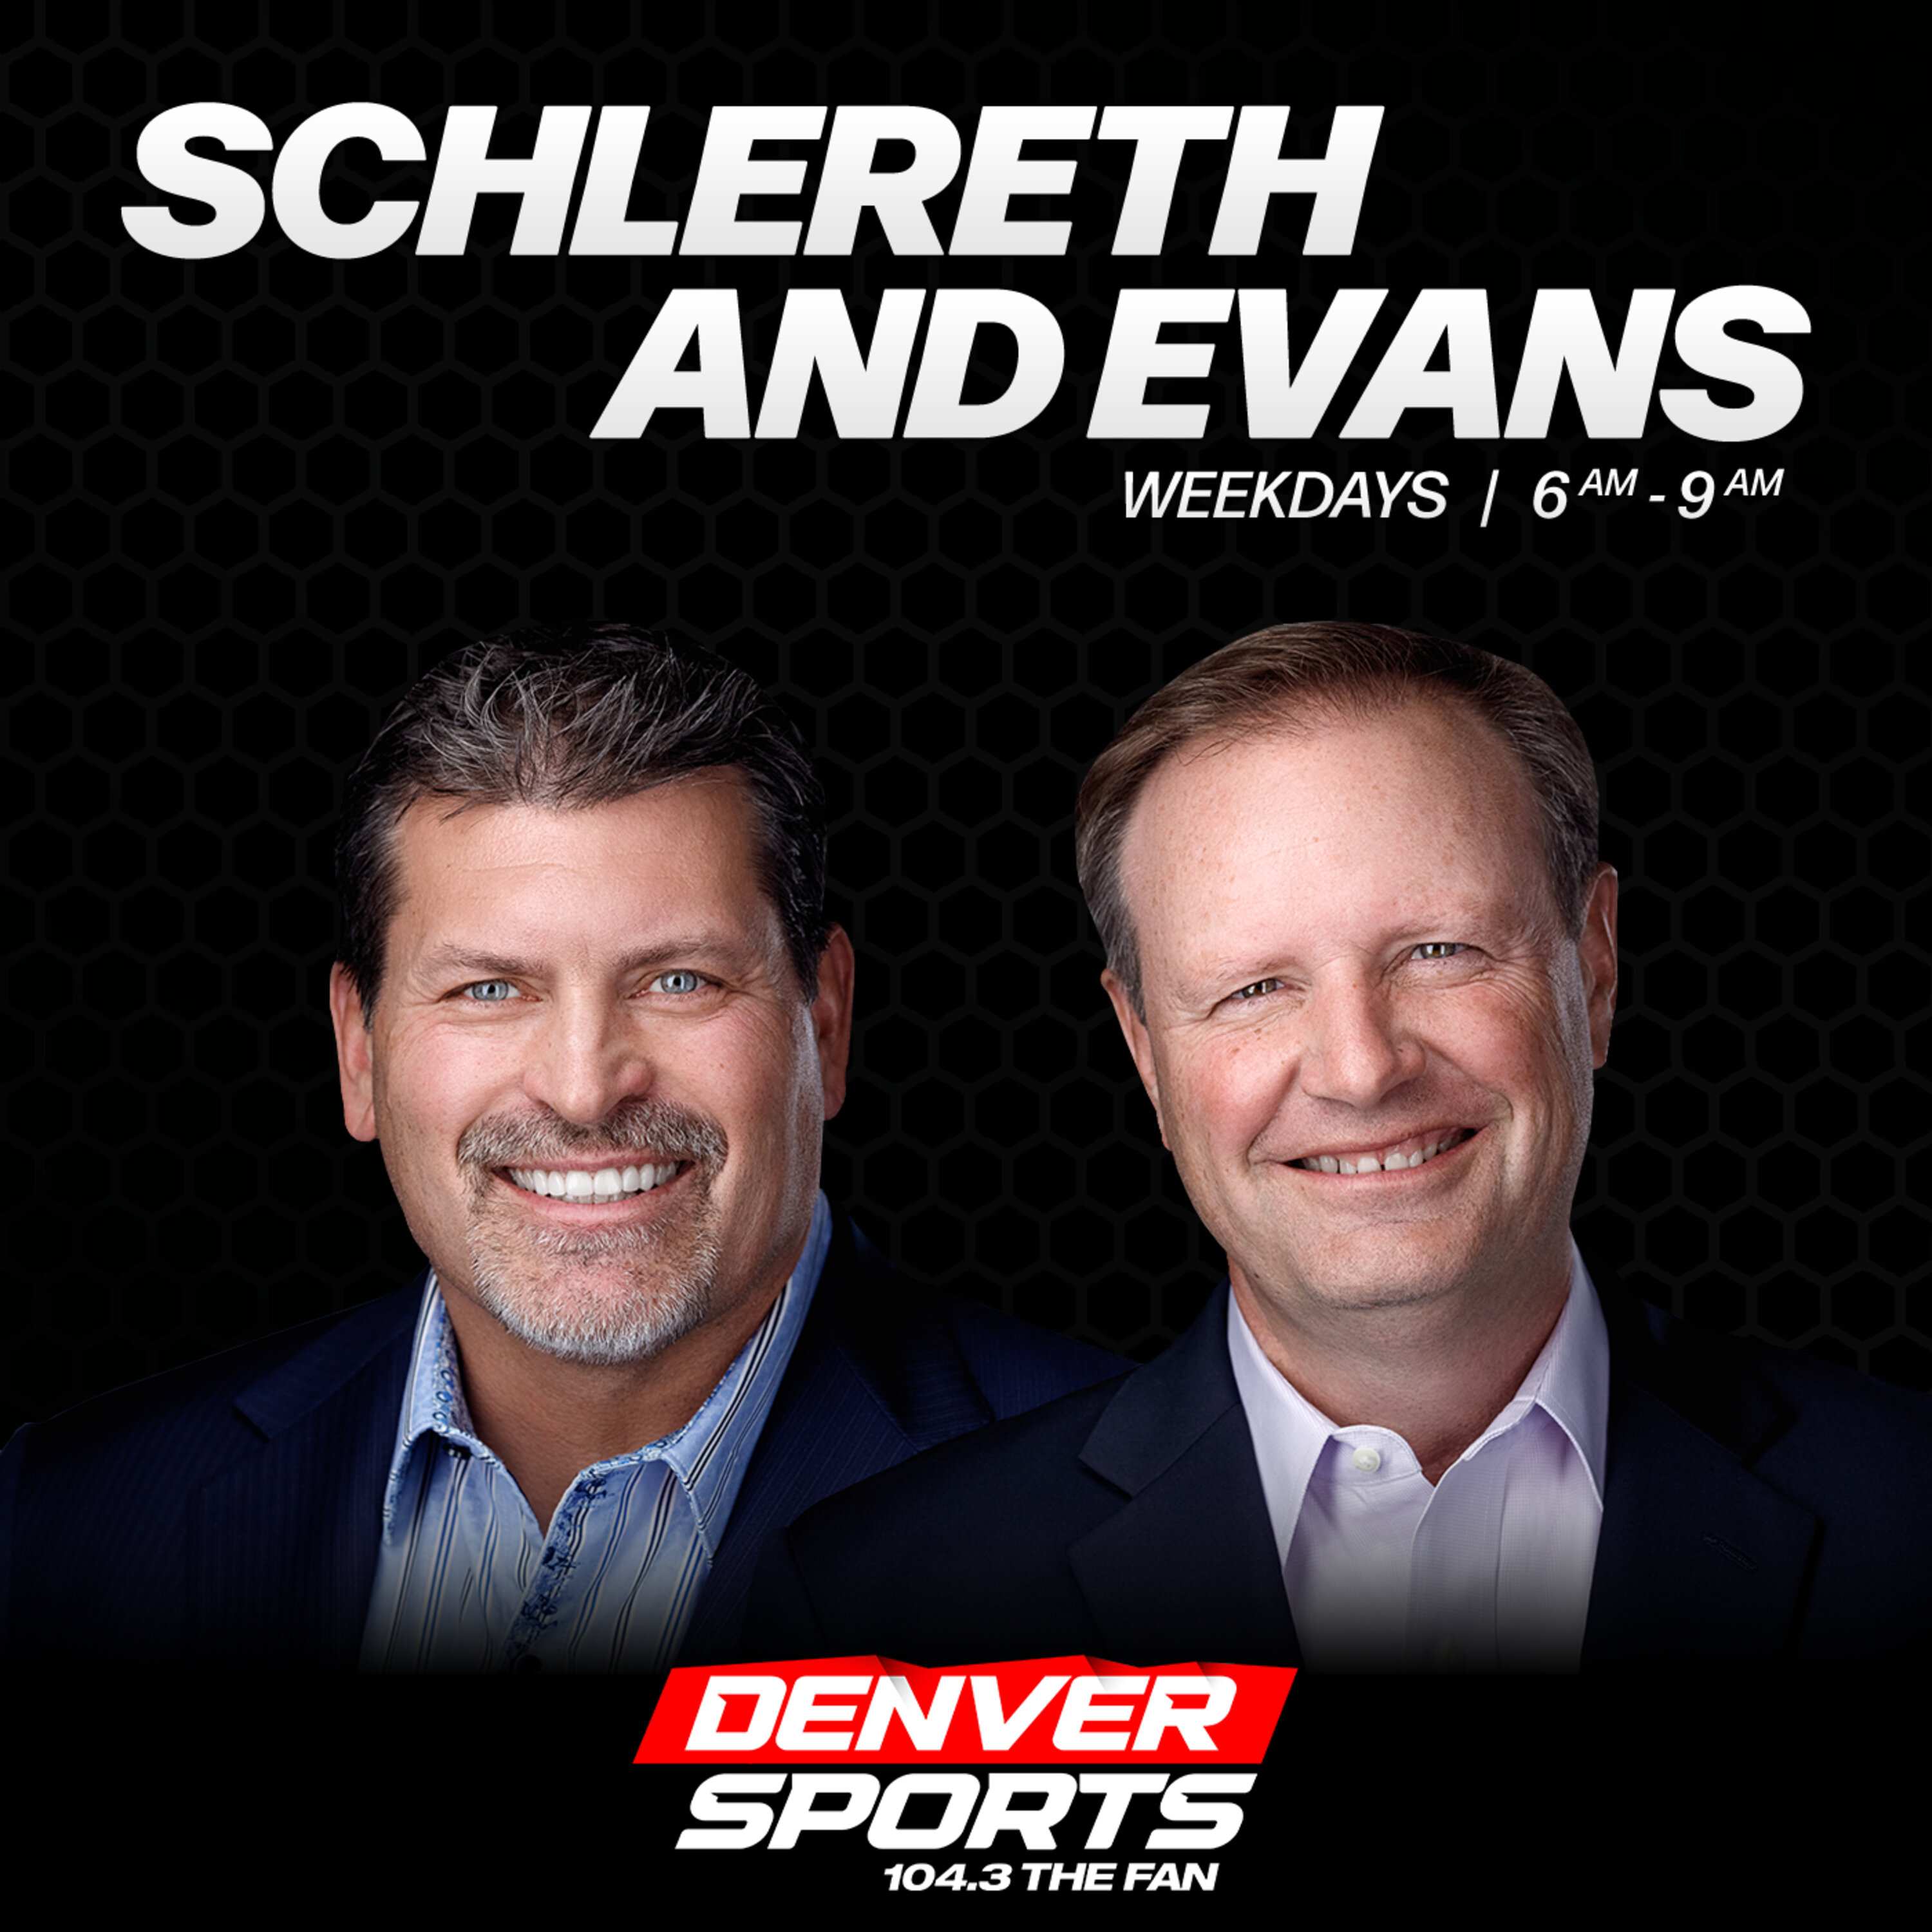 Schlereth and Evans Cover Image